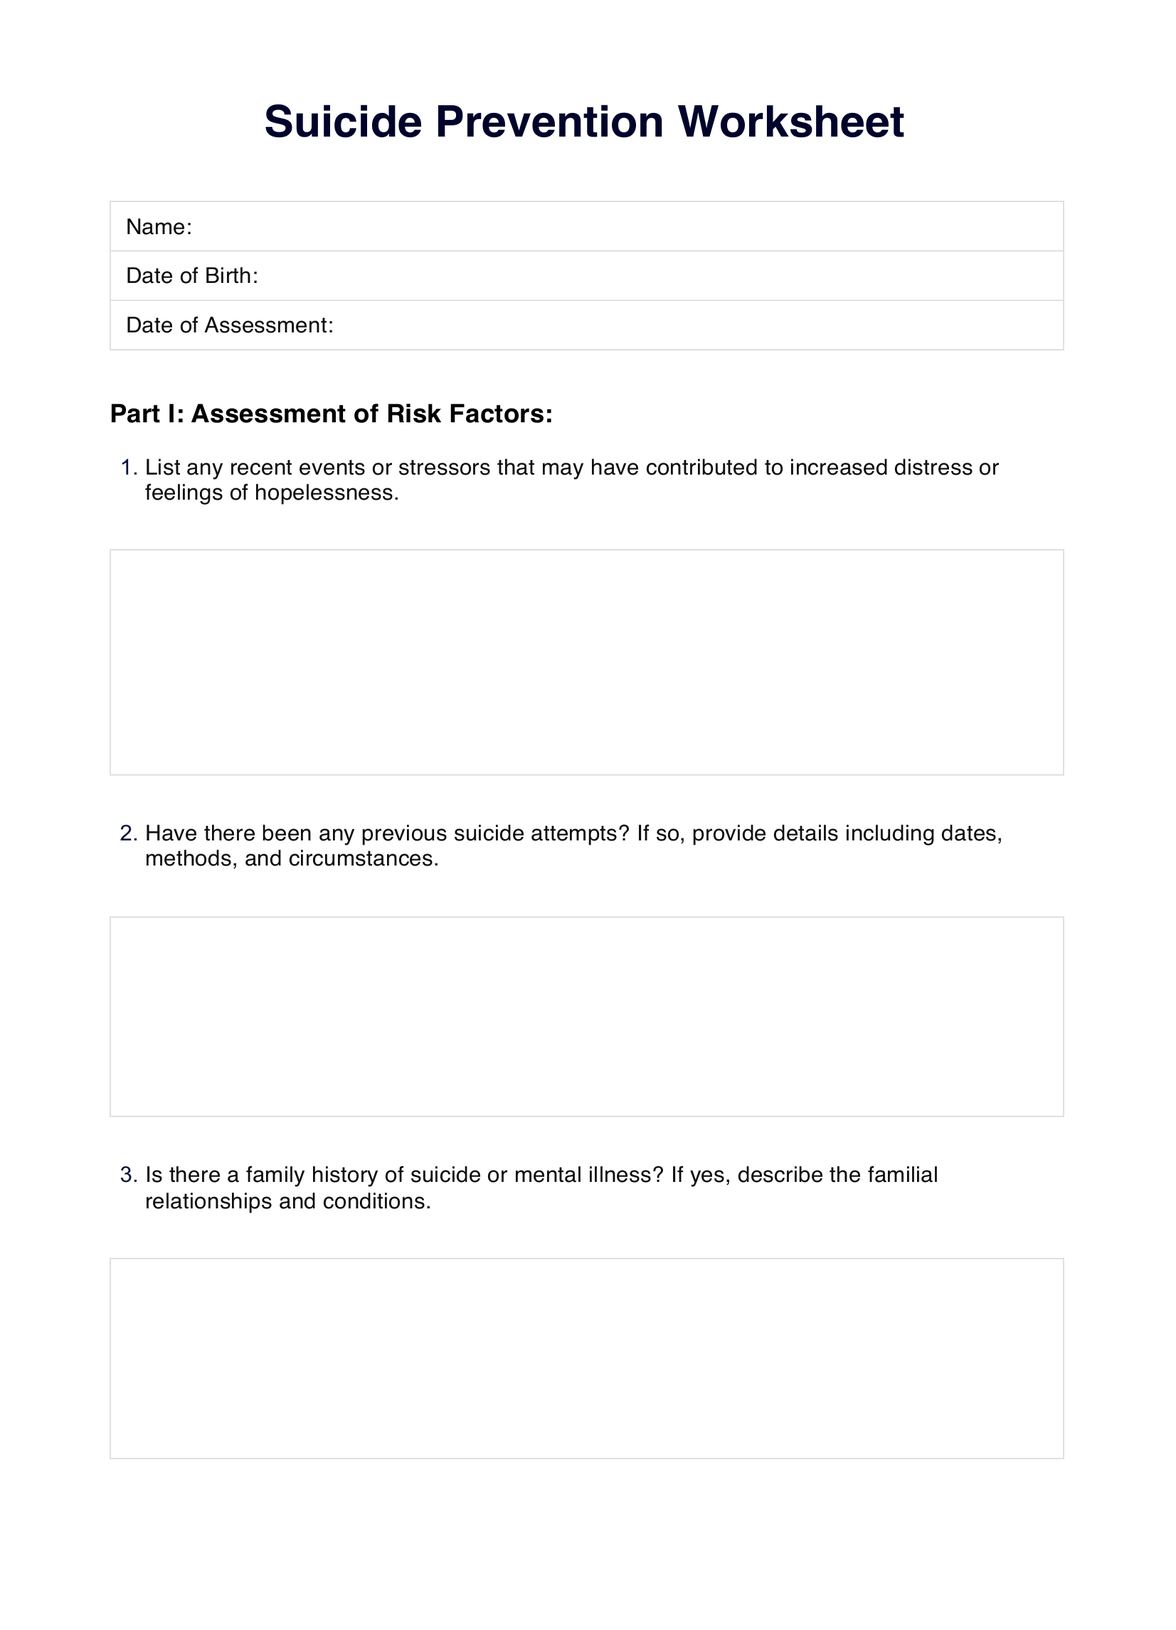 Suicide Prevention Worksheets PDF Example